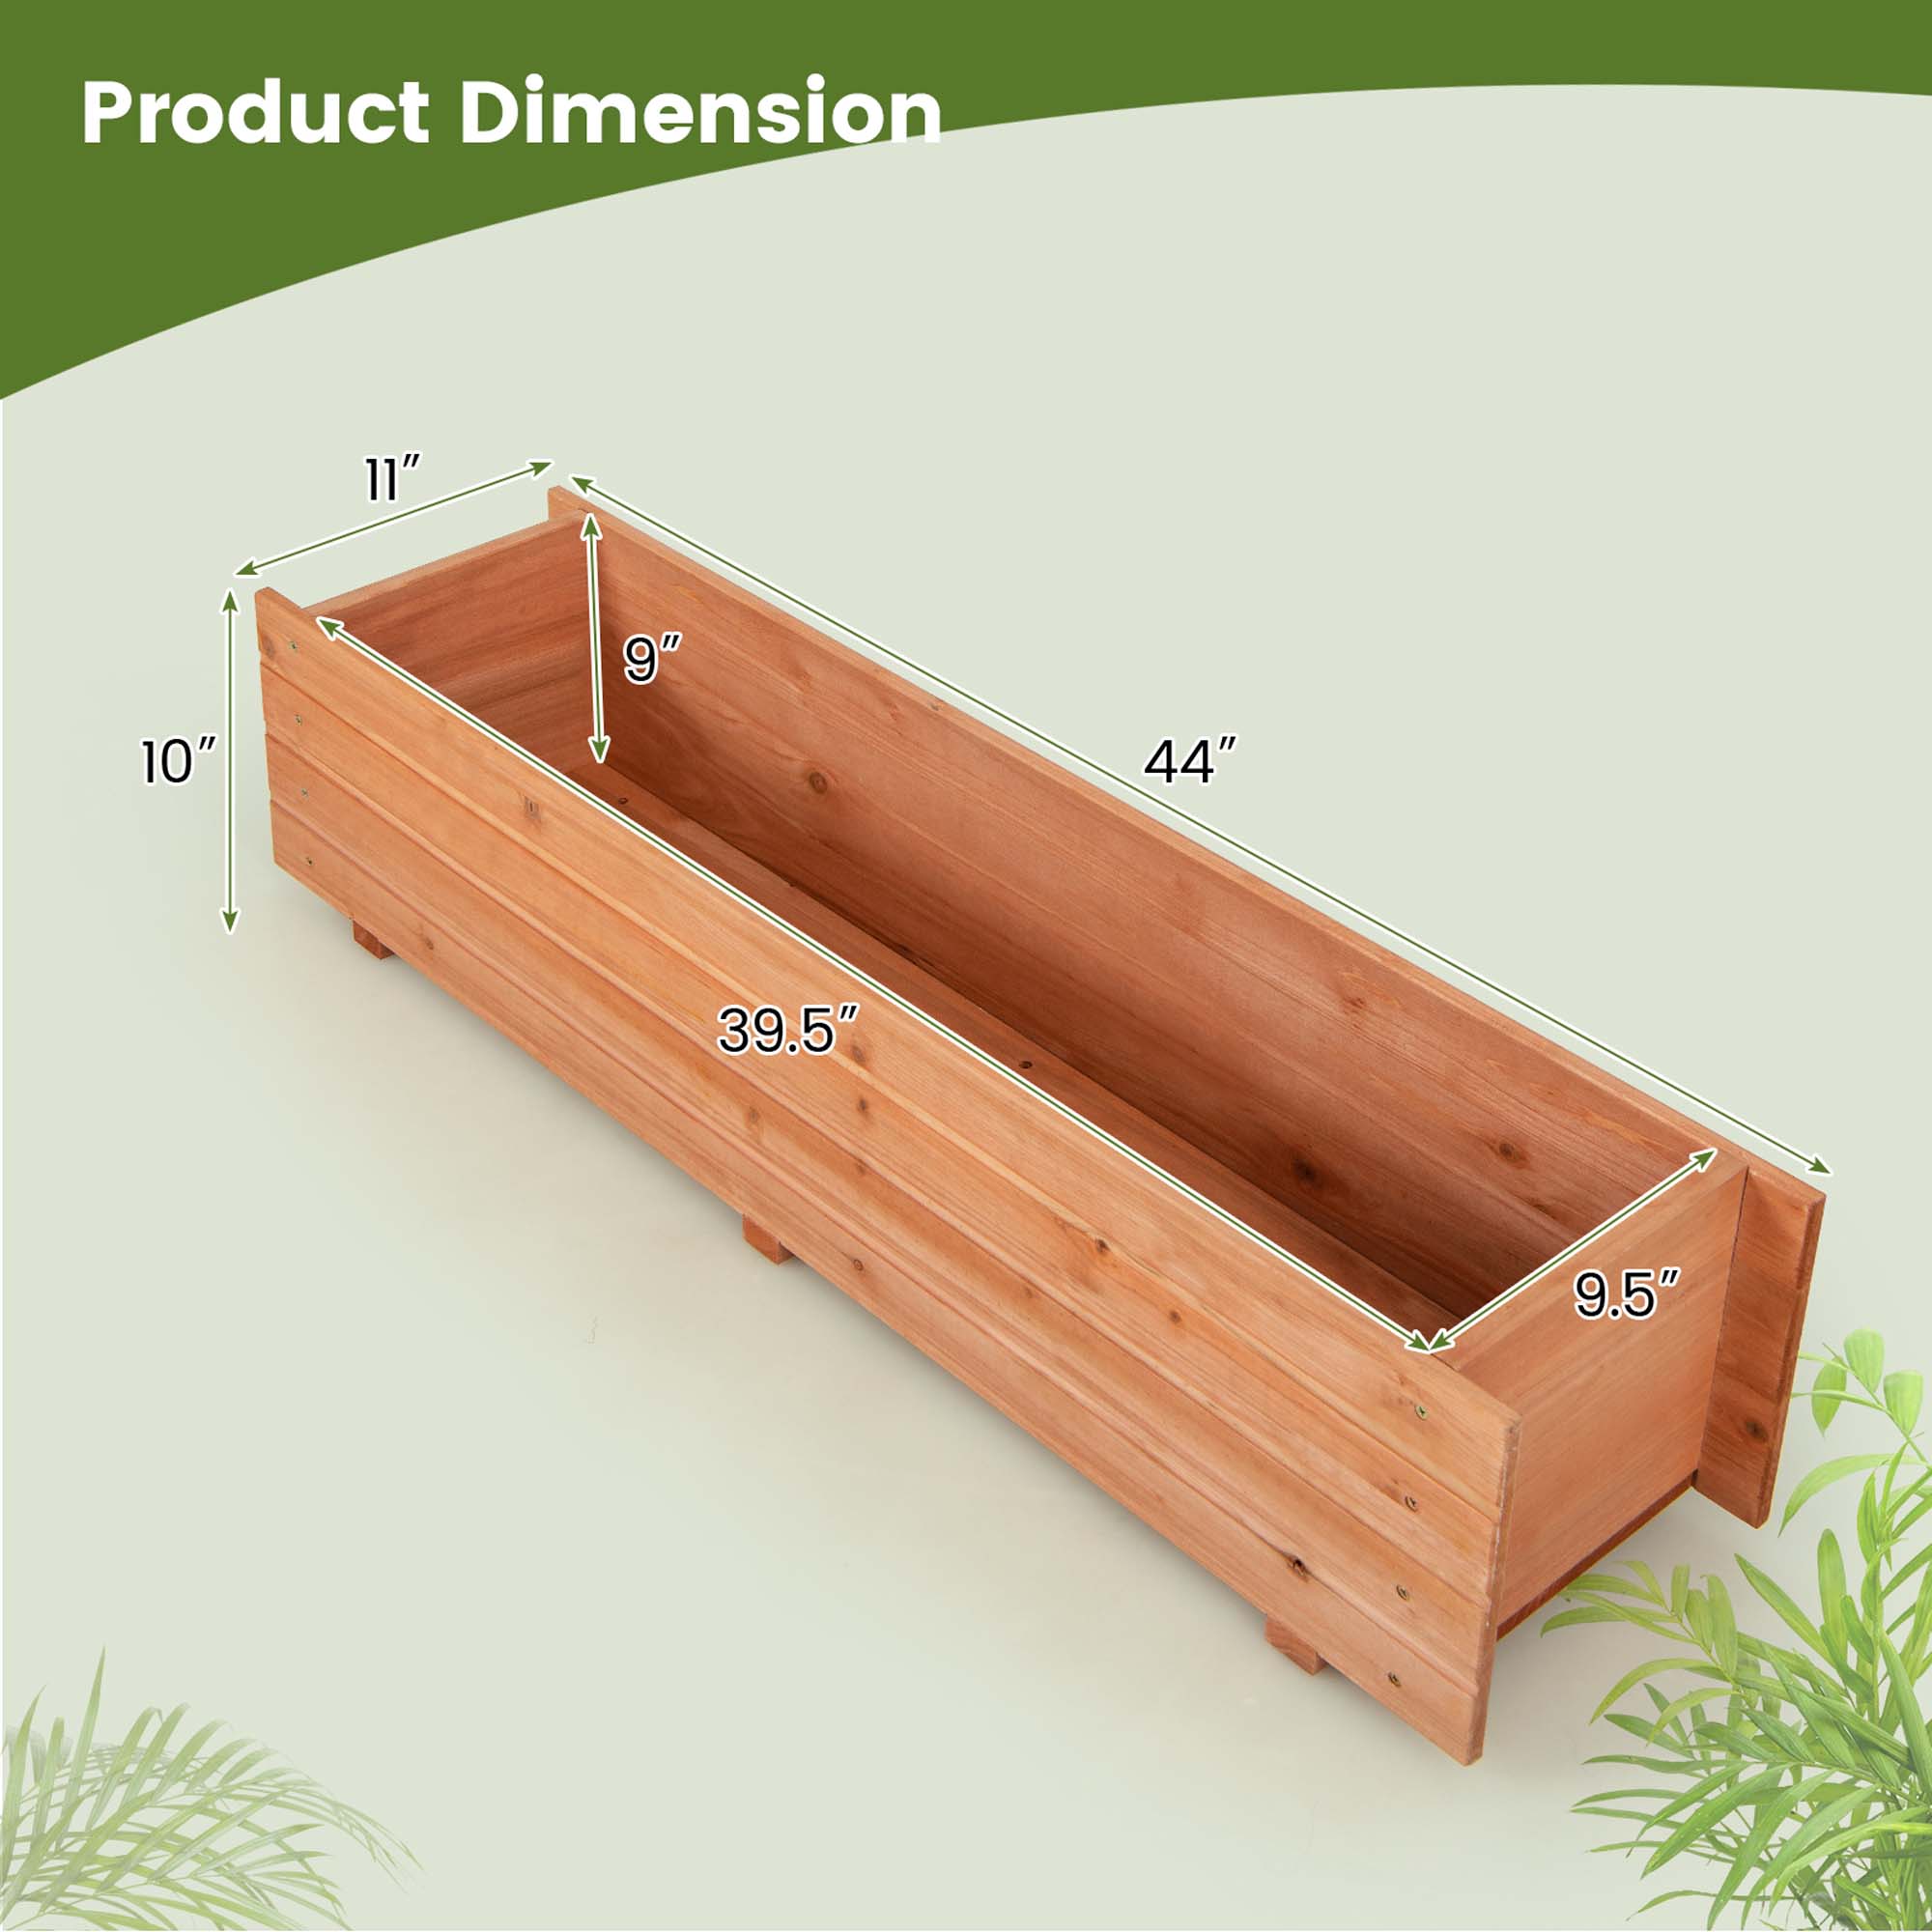 Costway Raised Garden Bed Wood Rectangular Planter Box with 2 Drainage Holes Outdoor - image 3 of 10